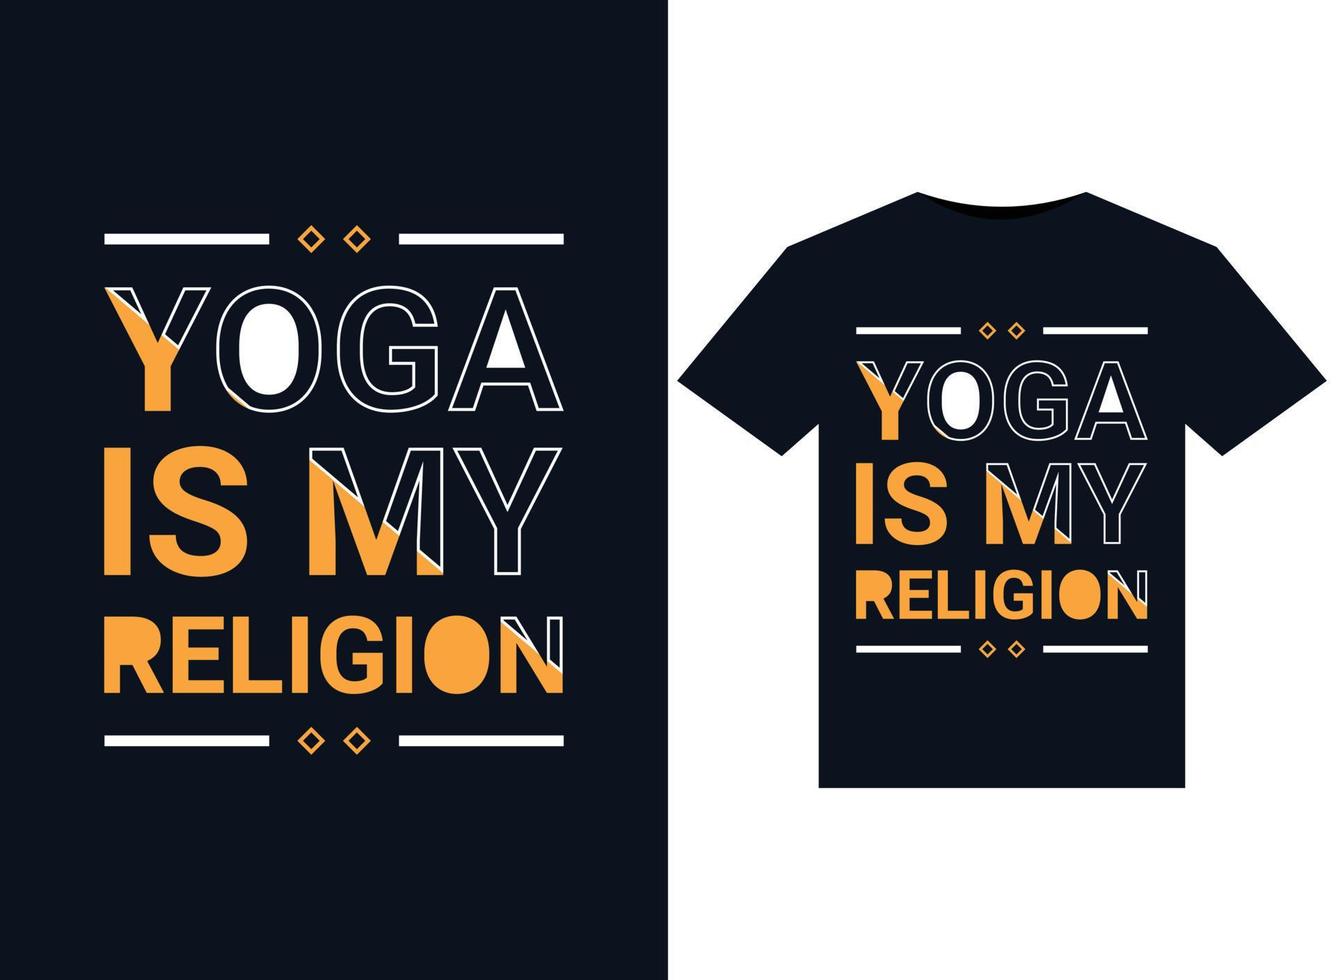 YOGA IS MY RELIGION illustrations for print-ready T-Shirts design vector